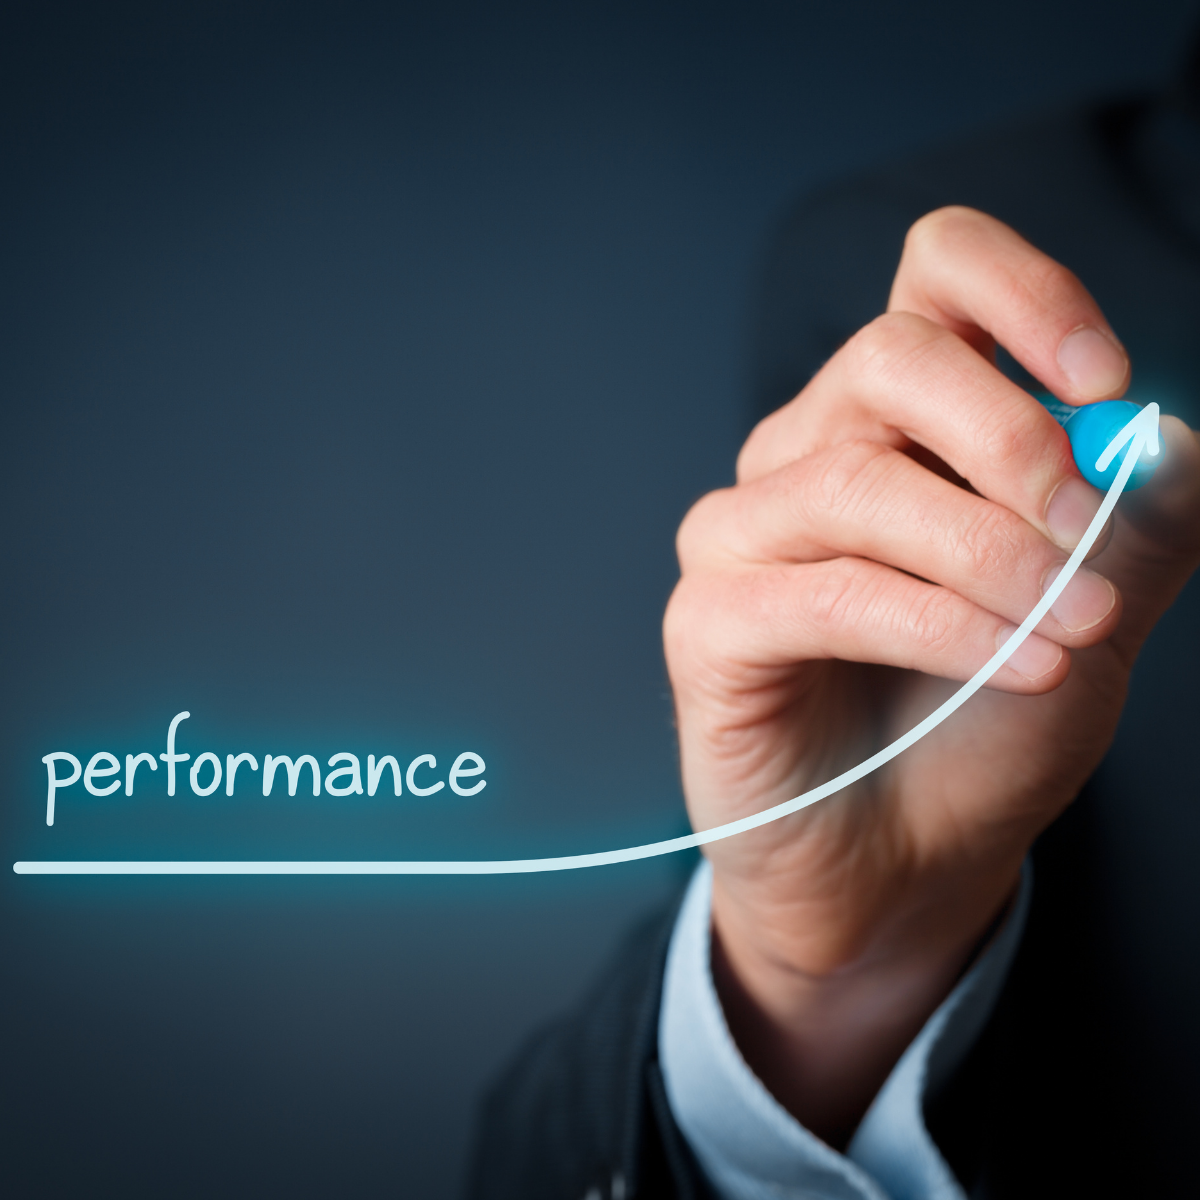 Performance Management 101 and Mentoring